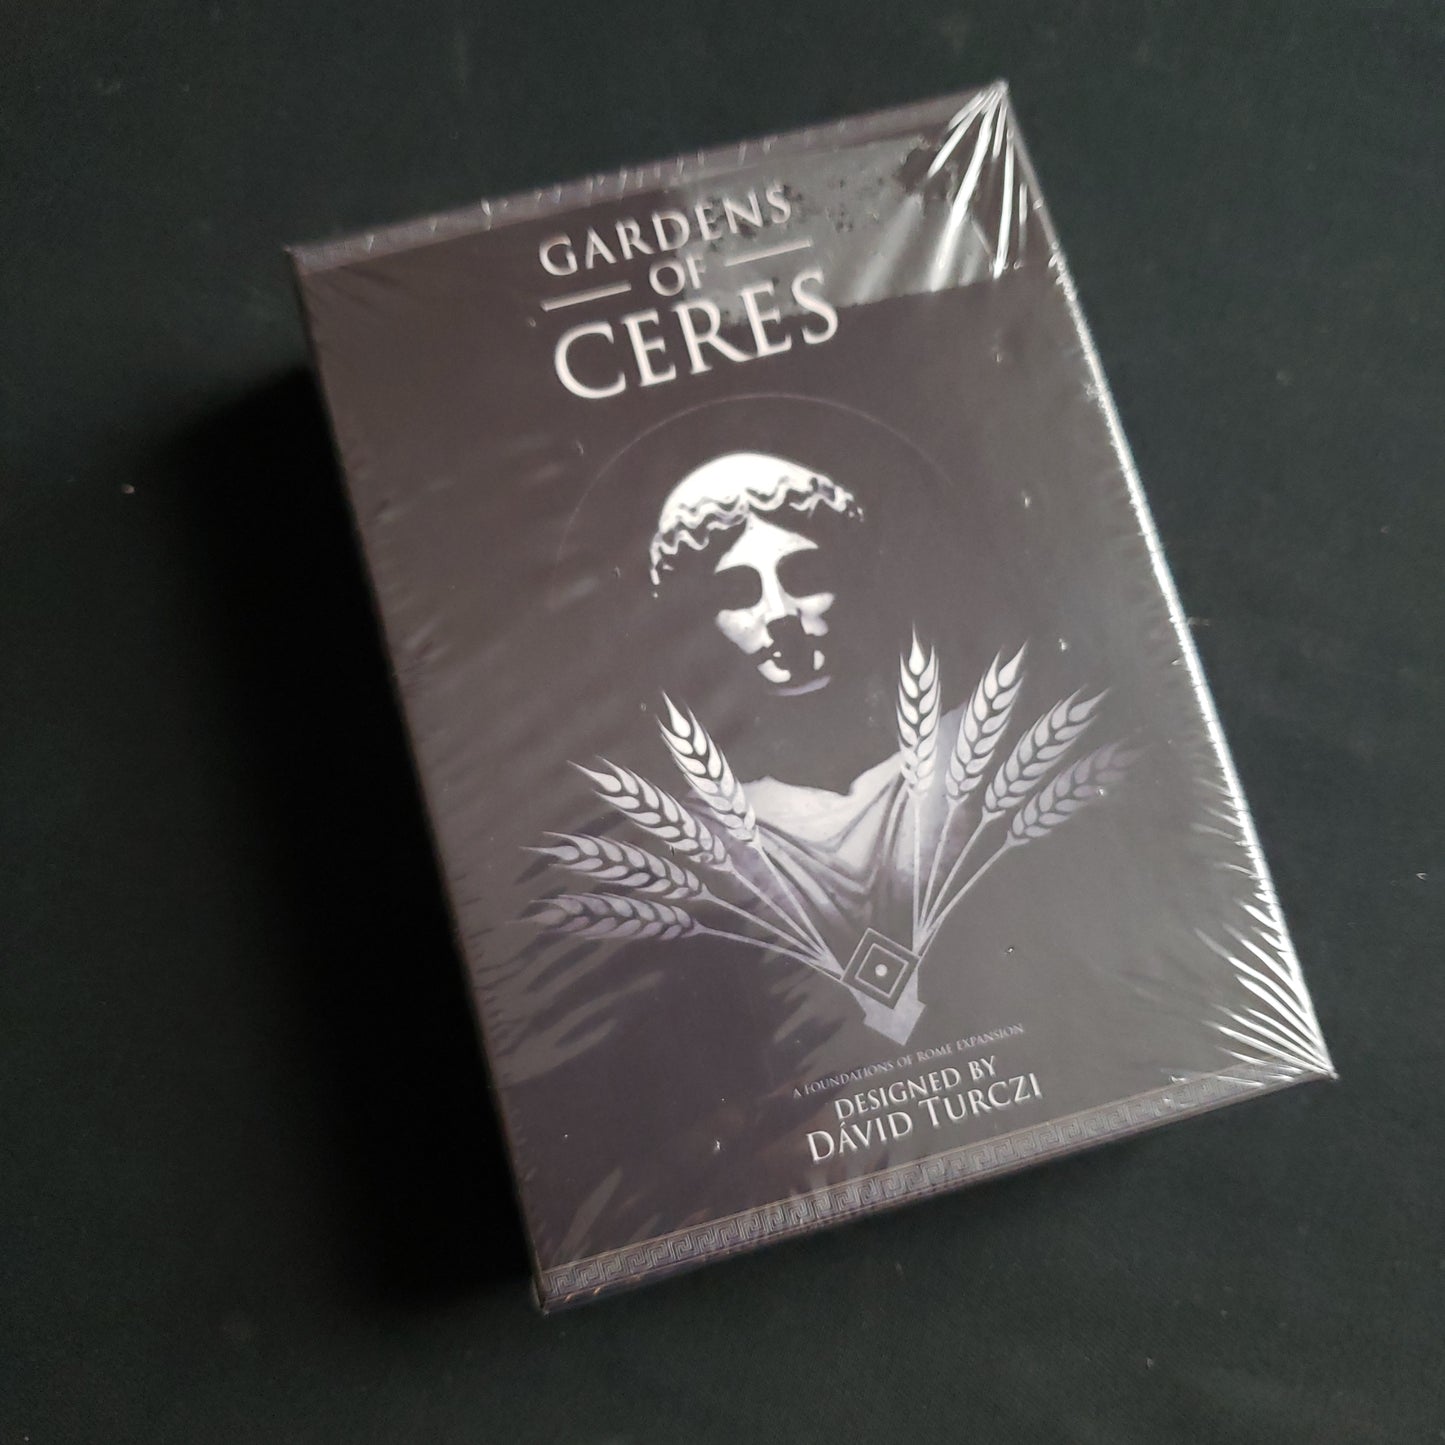 Image shows the front cover of the box of the Gardens of Ceres solo expansion for the board game Foundations of Rome